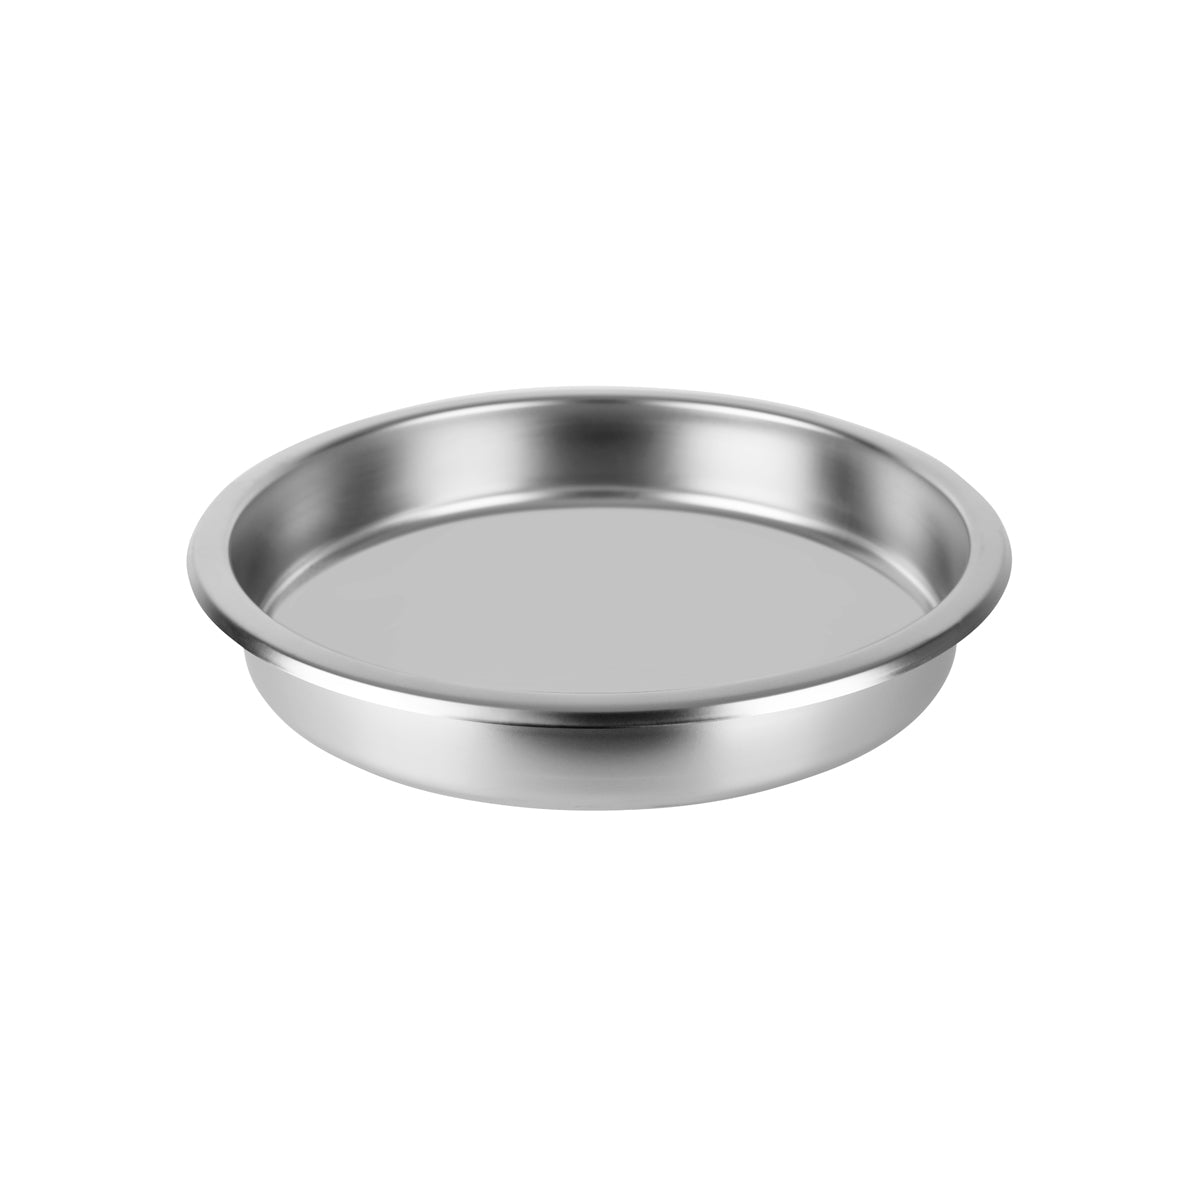 54926-I Chef Inox Round Insert Pan Stainless Steel to Suit 54926 Tomkin Australia Hospitality Supplies